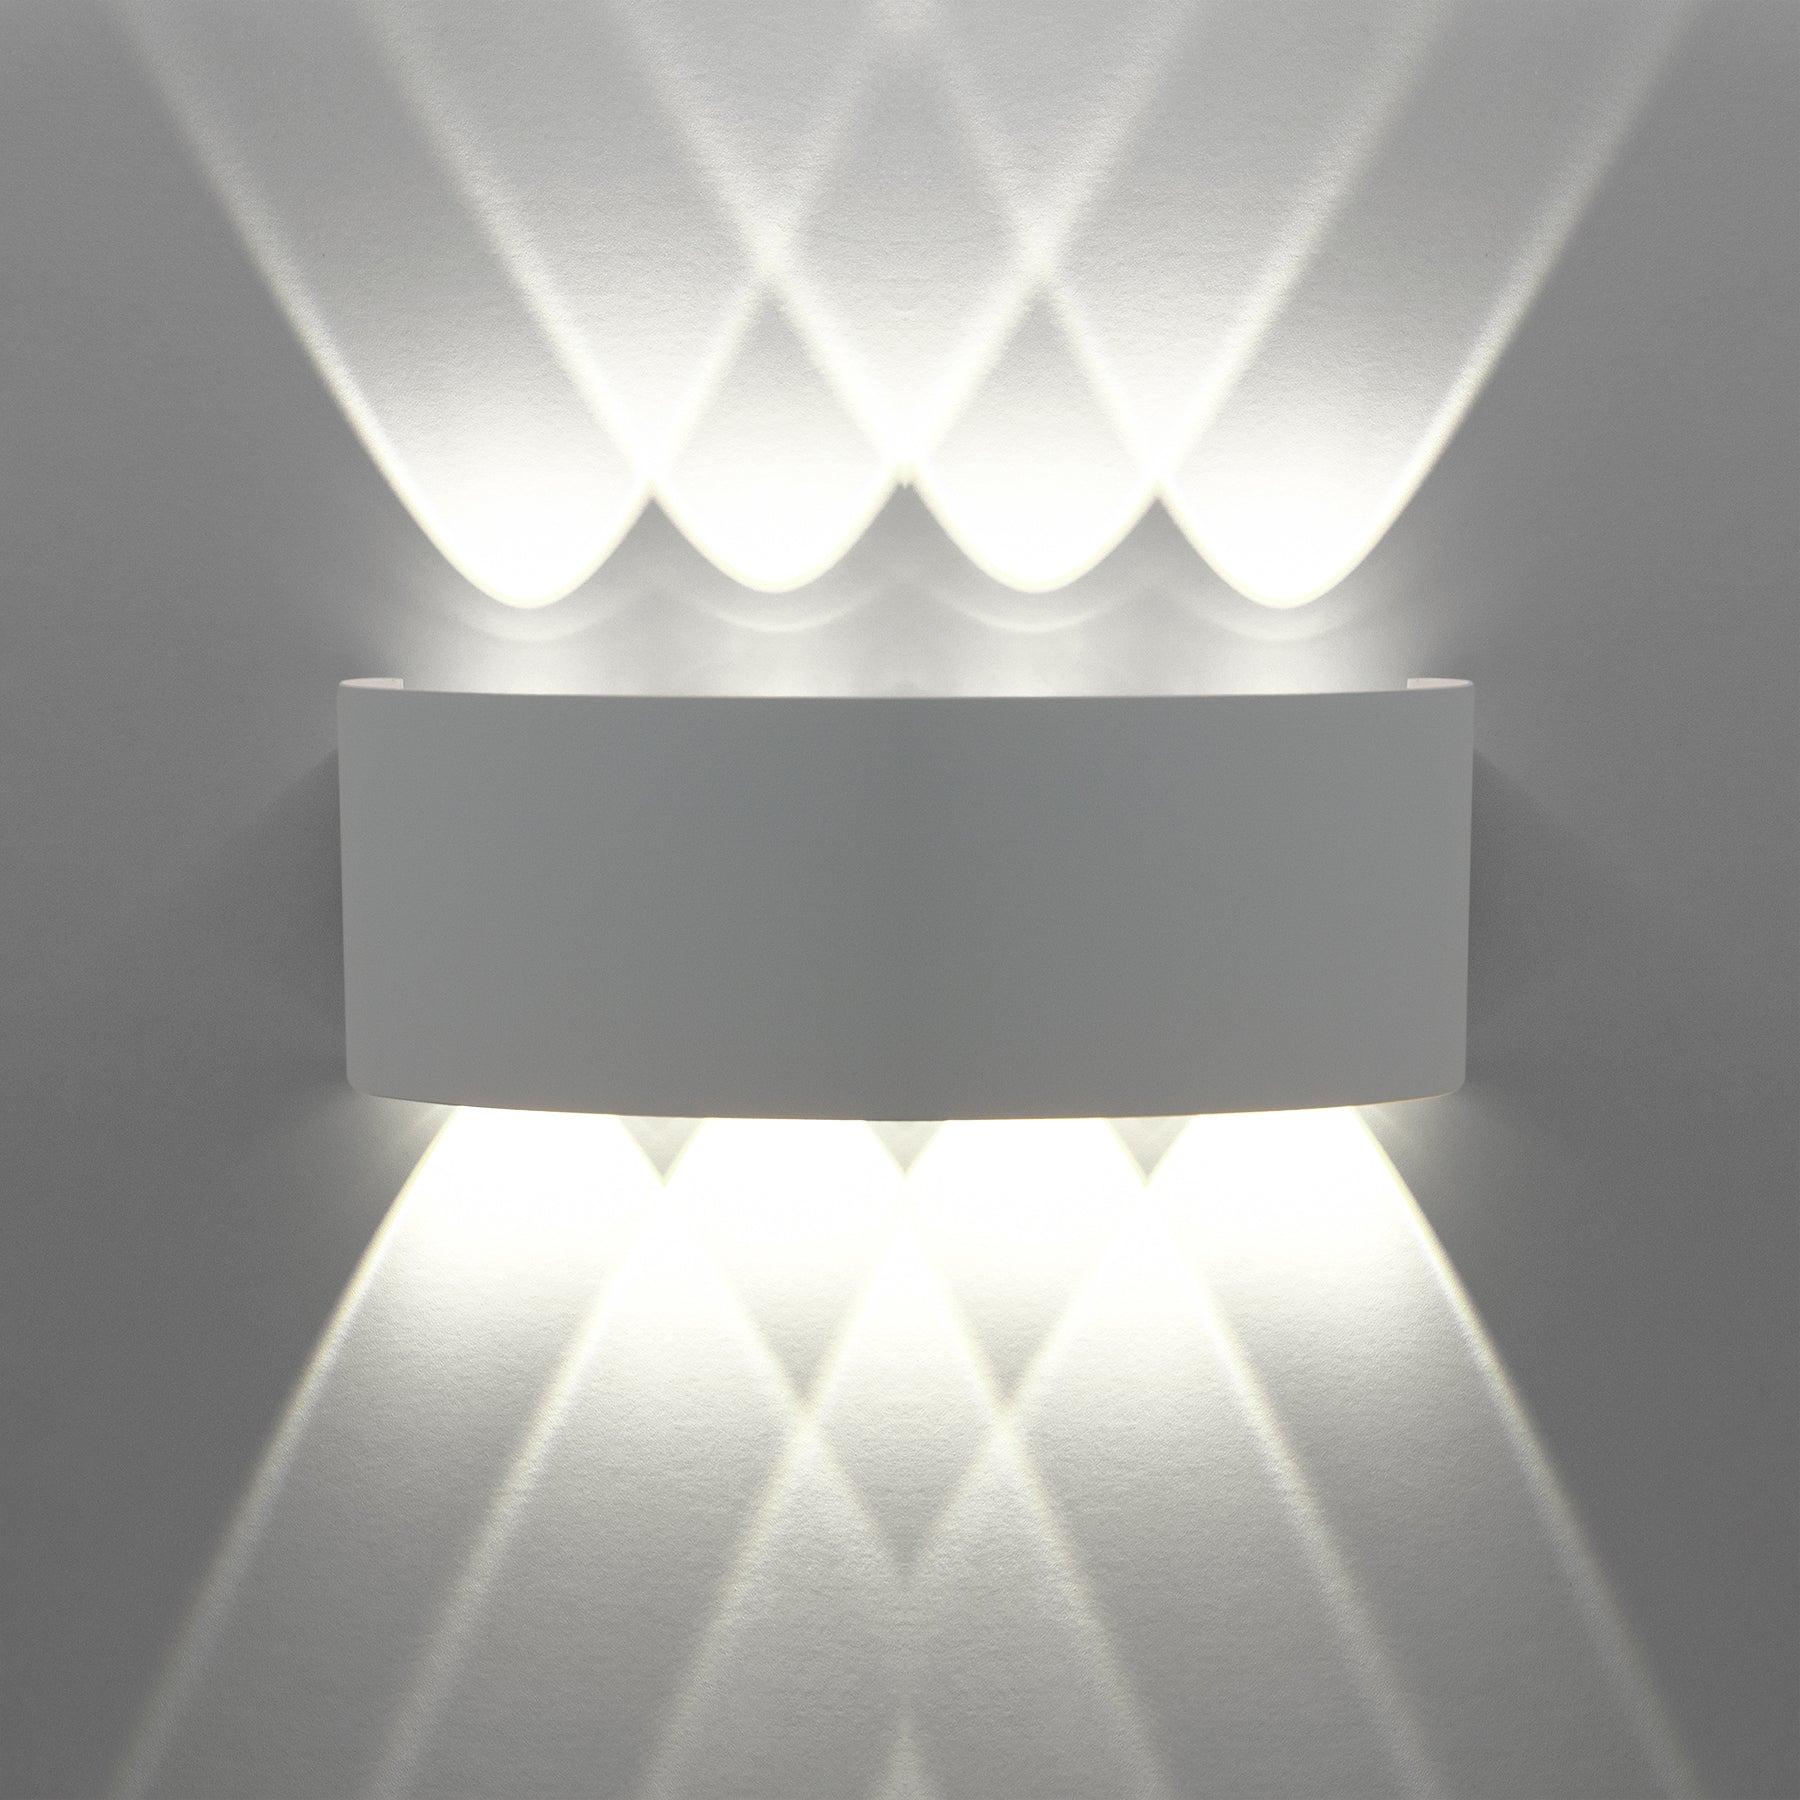 G.W.S. LED LED Wall Lights 8W / Cool White (6000K) 8W White Up and Down LED Wall Light (WL-T8)